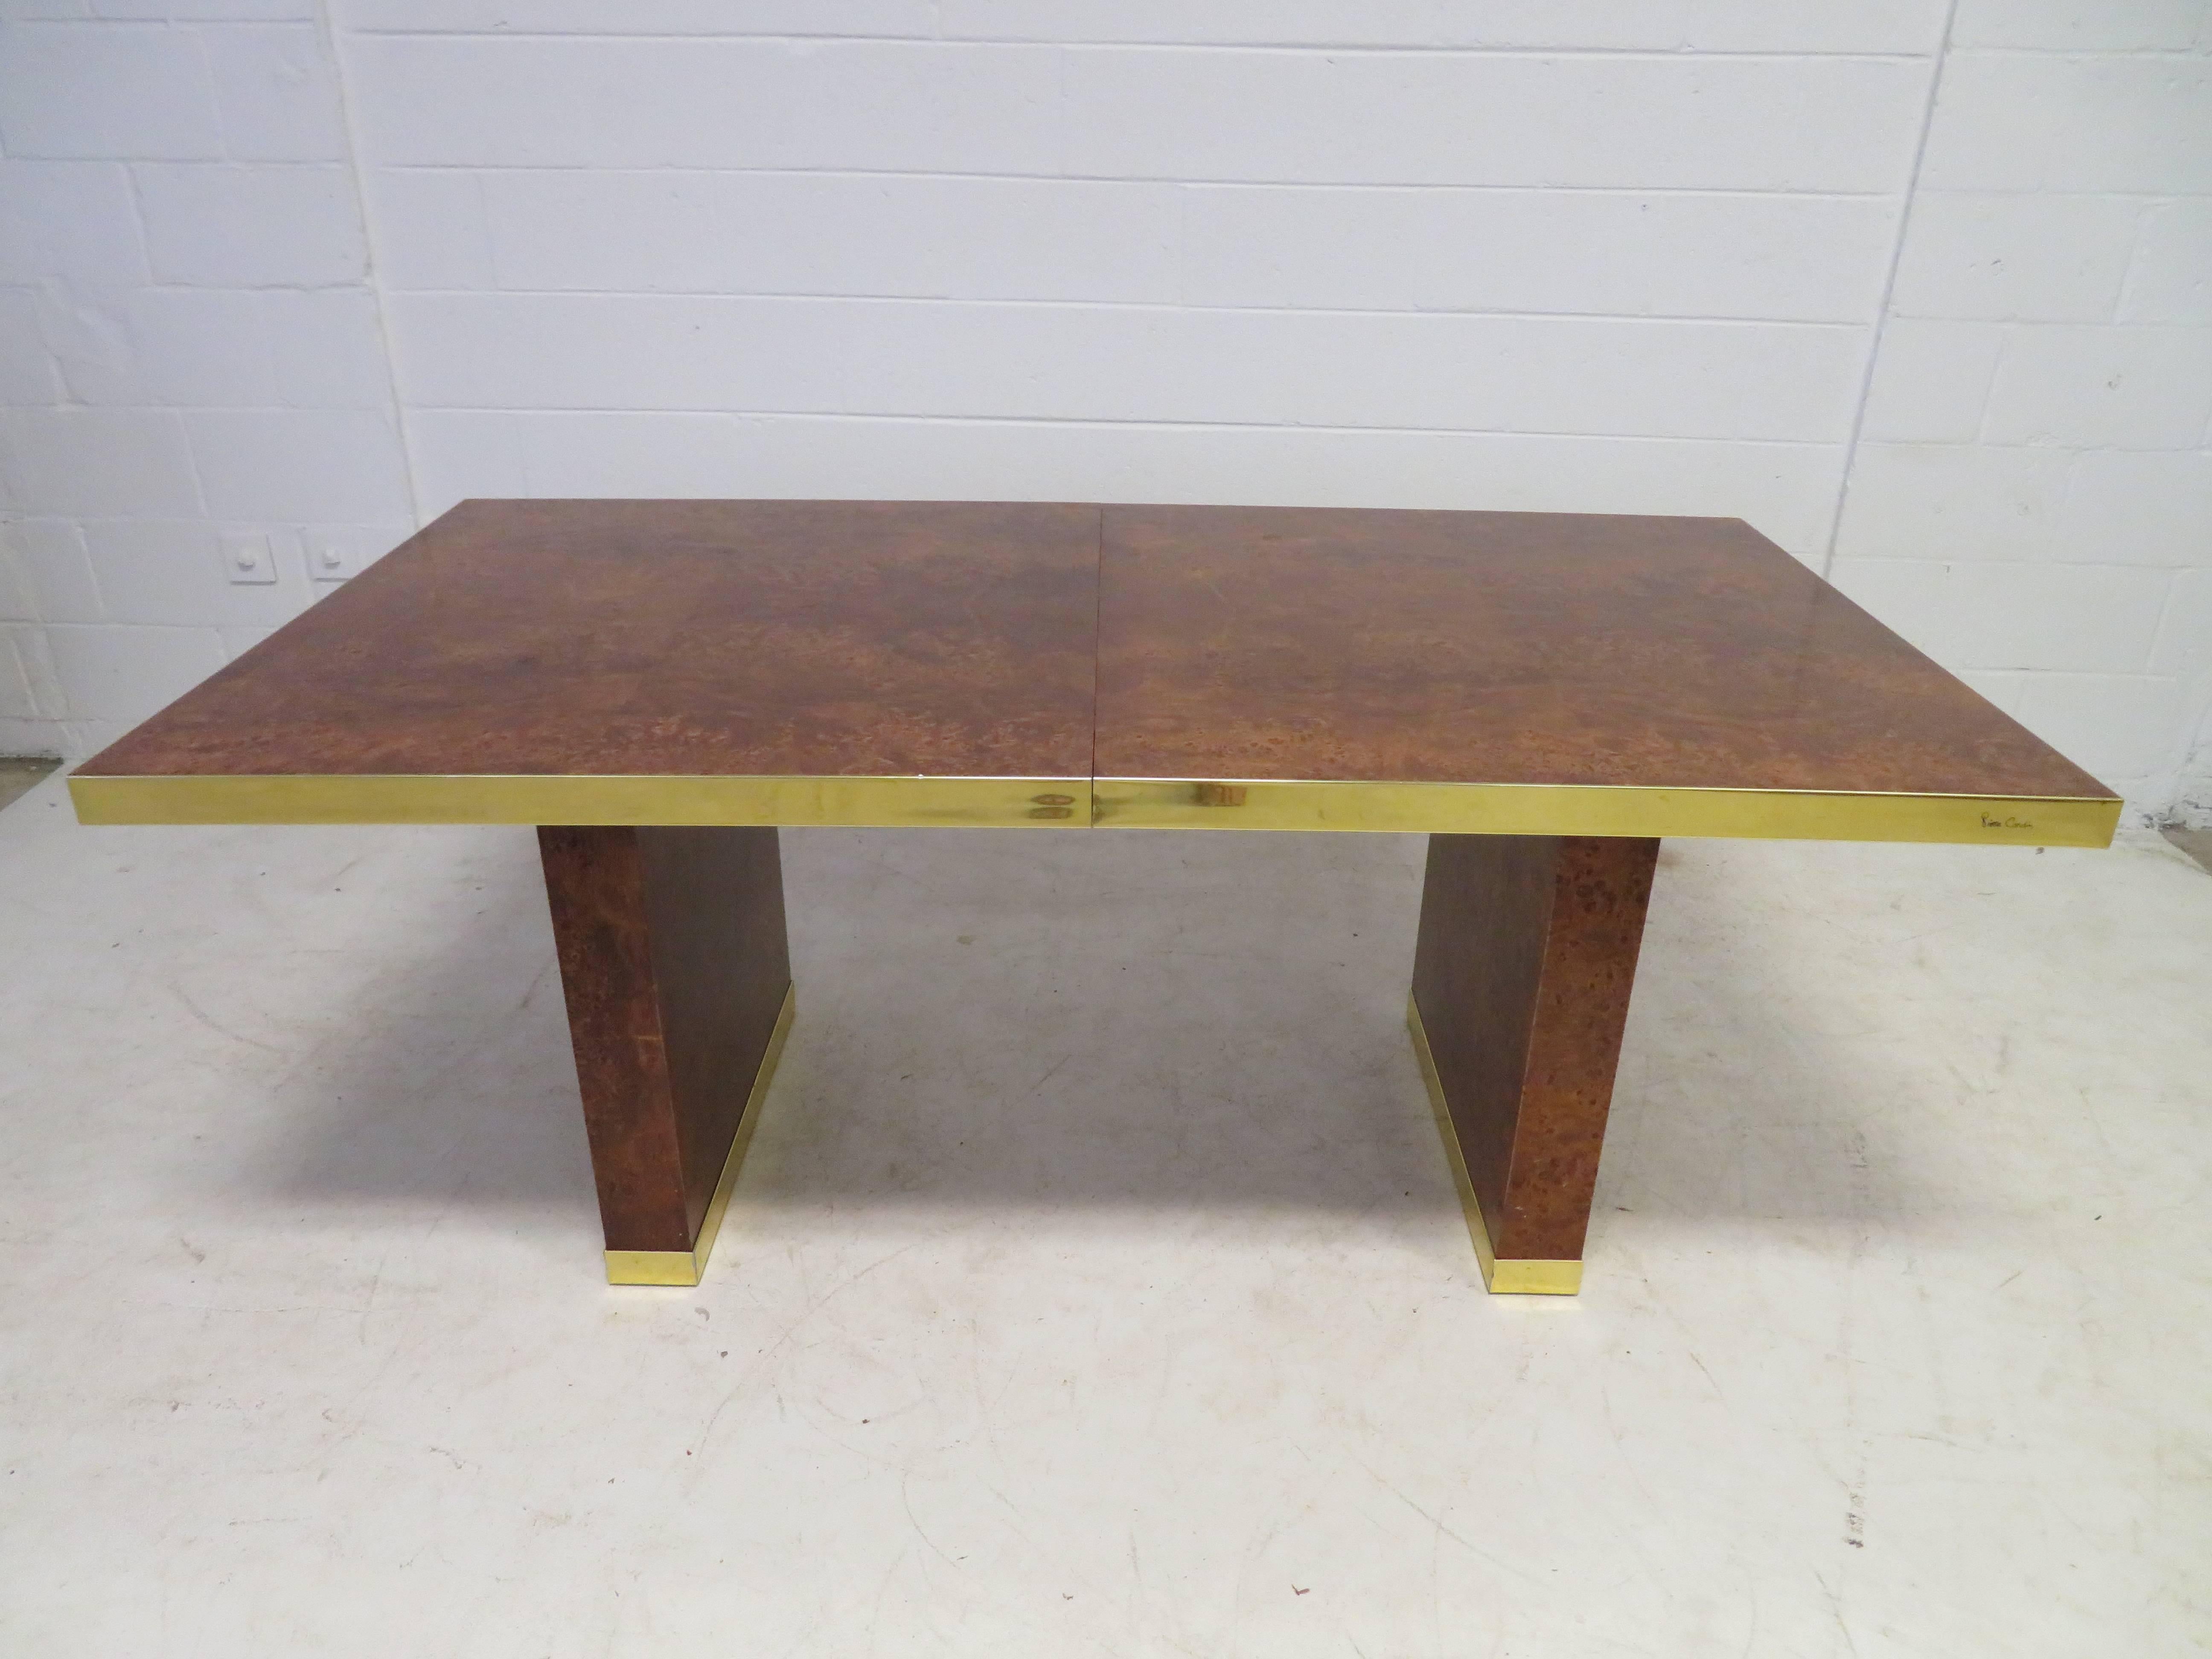 Handsome burl and brass dining table by Pierre Cardin, circa 1970s. Bookmatched olive wood with lovey brass detail. Pure sophistication! Very nice vintage condition, brass with wonderful patina. This table retains its original finish and has two